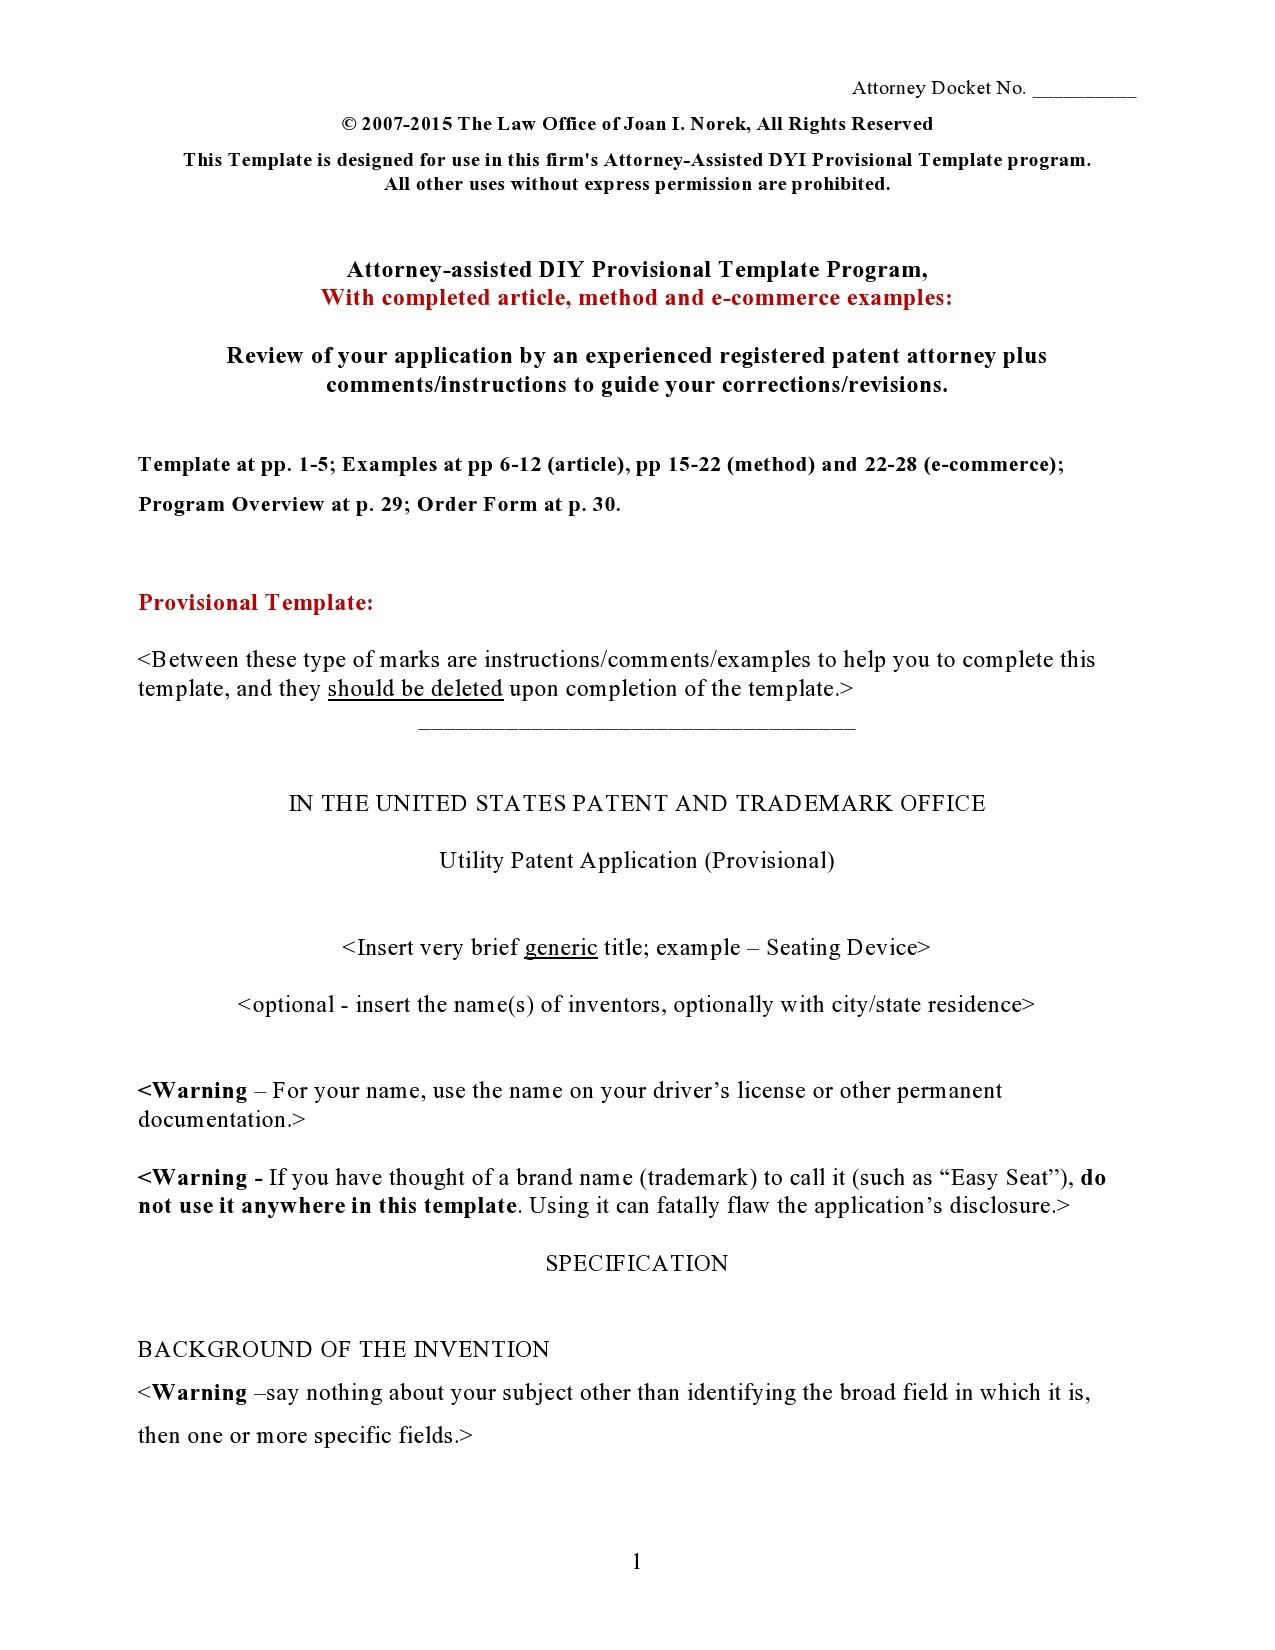 Free provisional patent application template 04